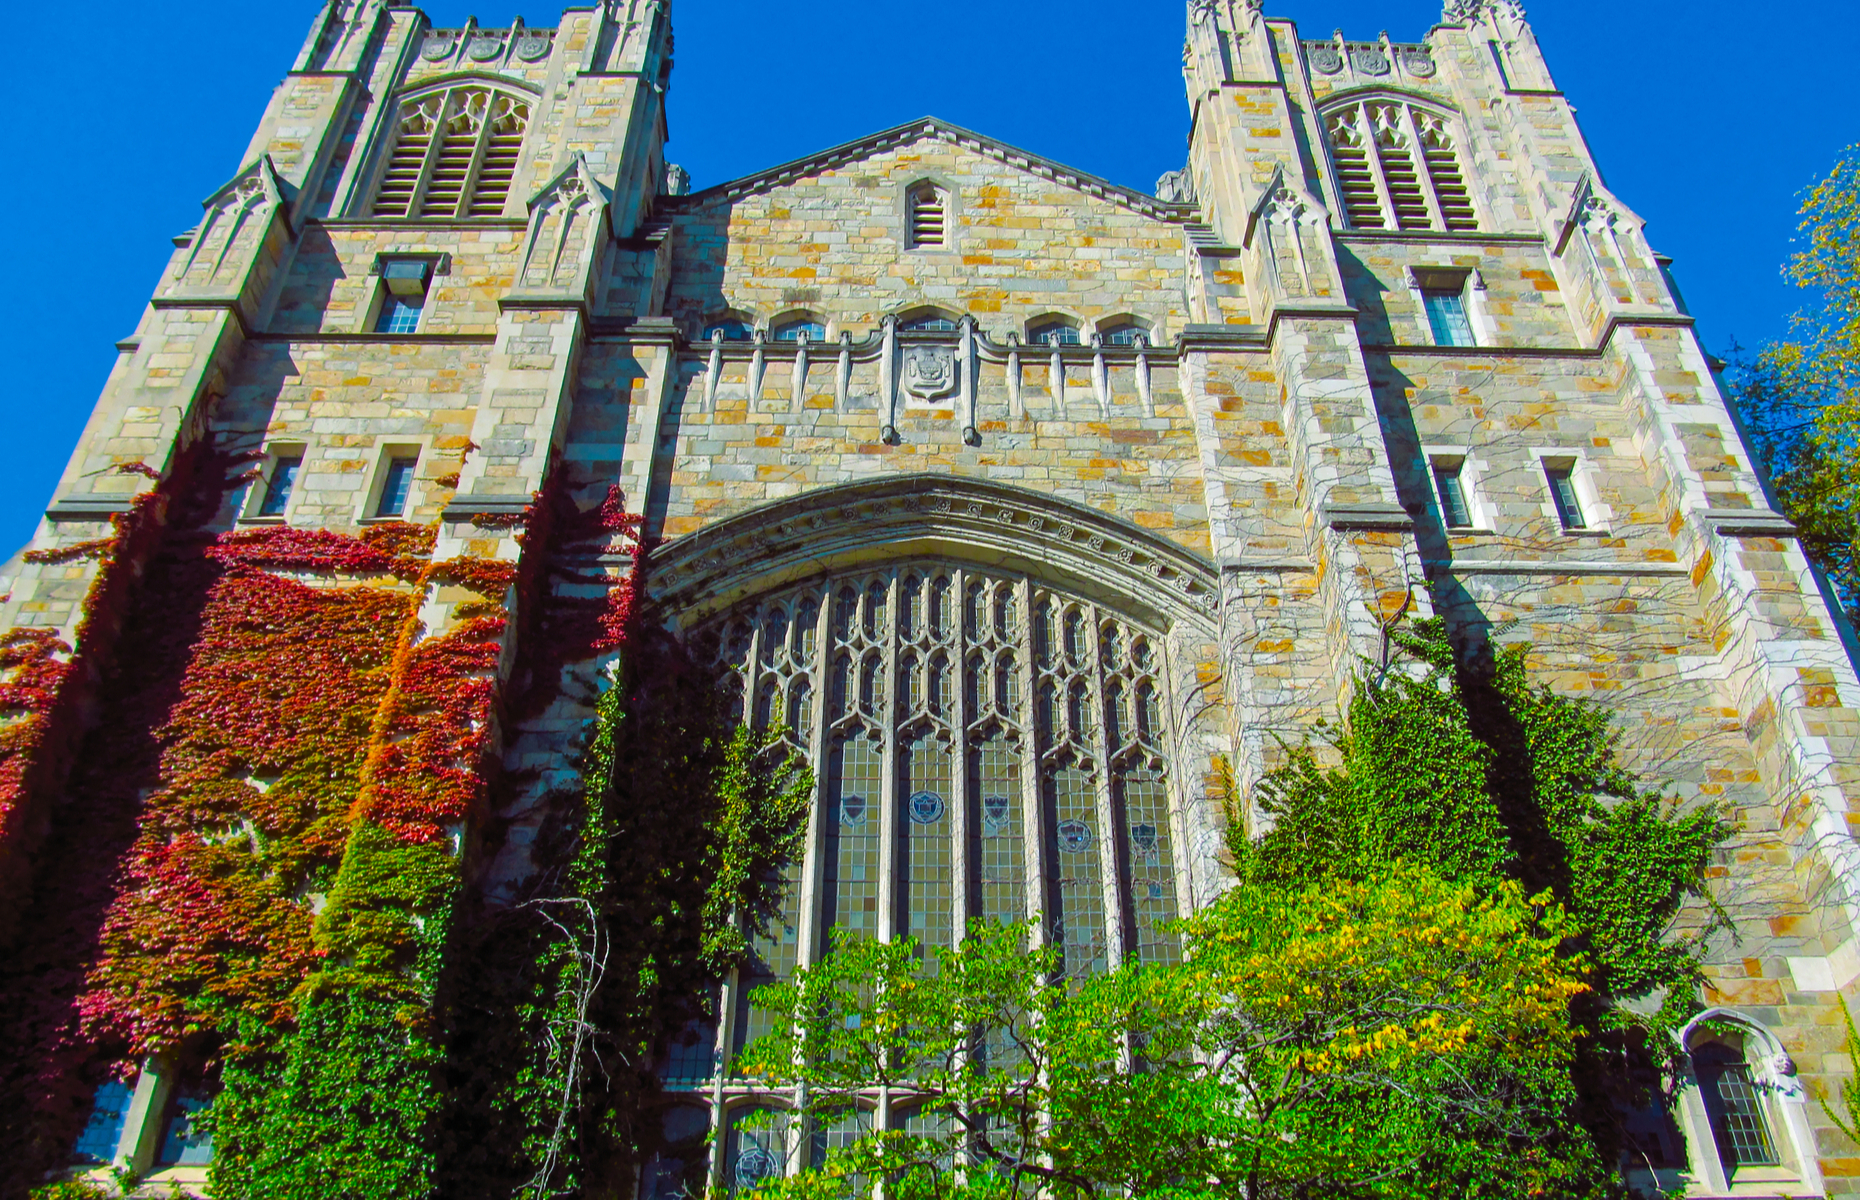 <p>There are many beautiful spots on the University of Michigan’s campus in Ann Arbor, but the most striking is the <a href="https://www.law.umich.edu/historyandtraditions/buildings/LegalResearchLibrary/Pages/default.aspx" rel="noreferrer noopener">William W. Cook Legal Research Library</a> (pictured), with its tall stained-glass windows and elaborate entranceway.</p>